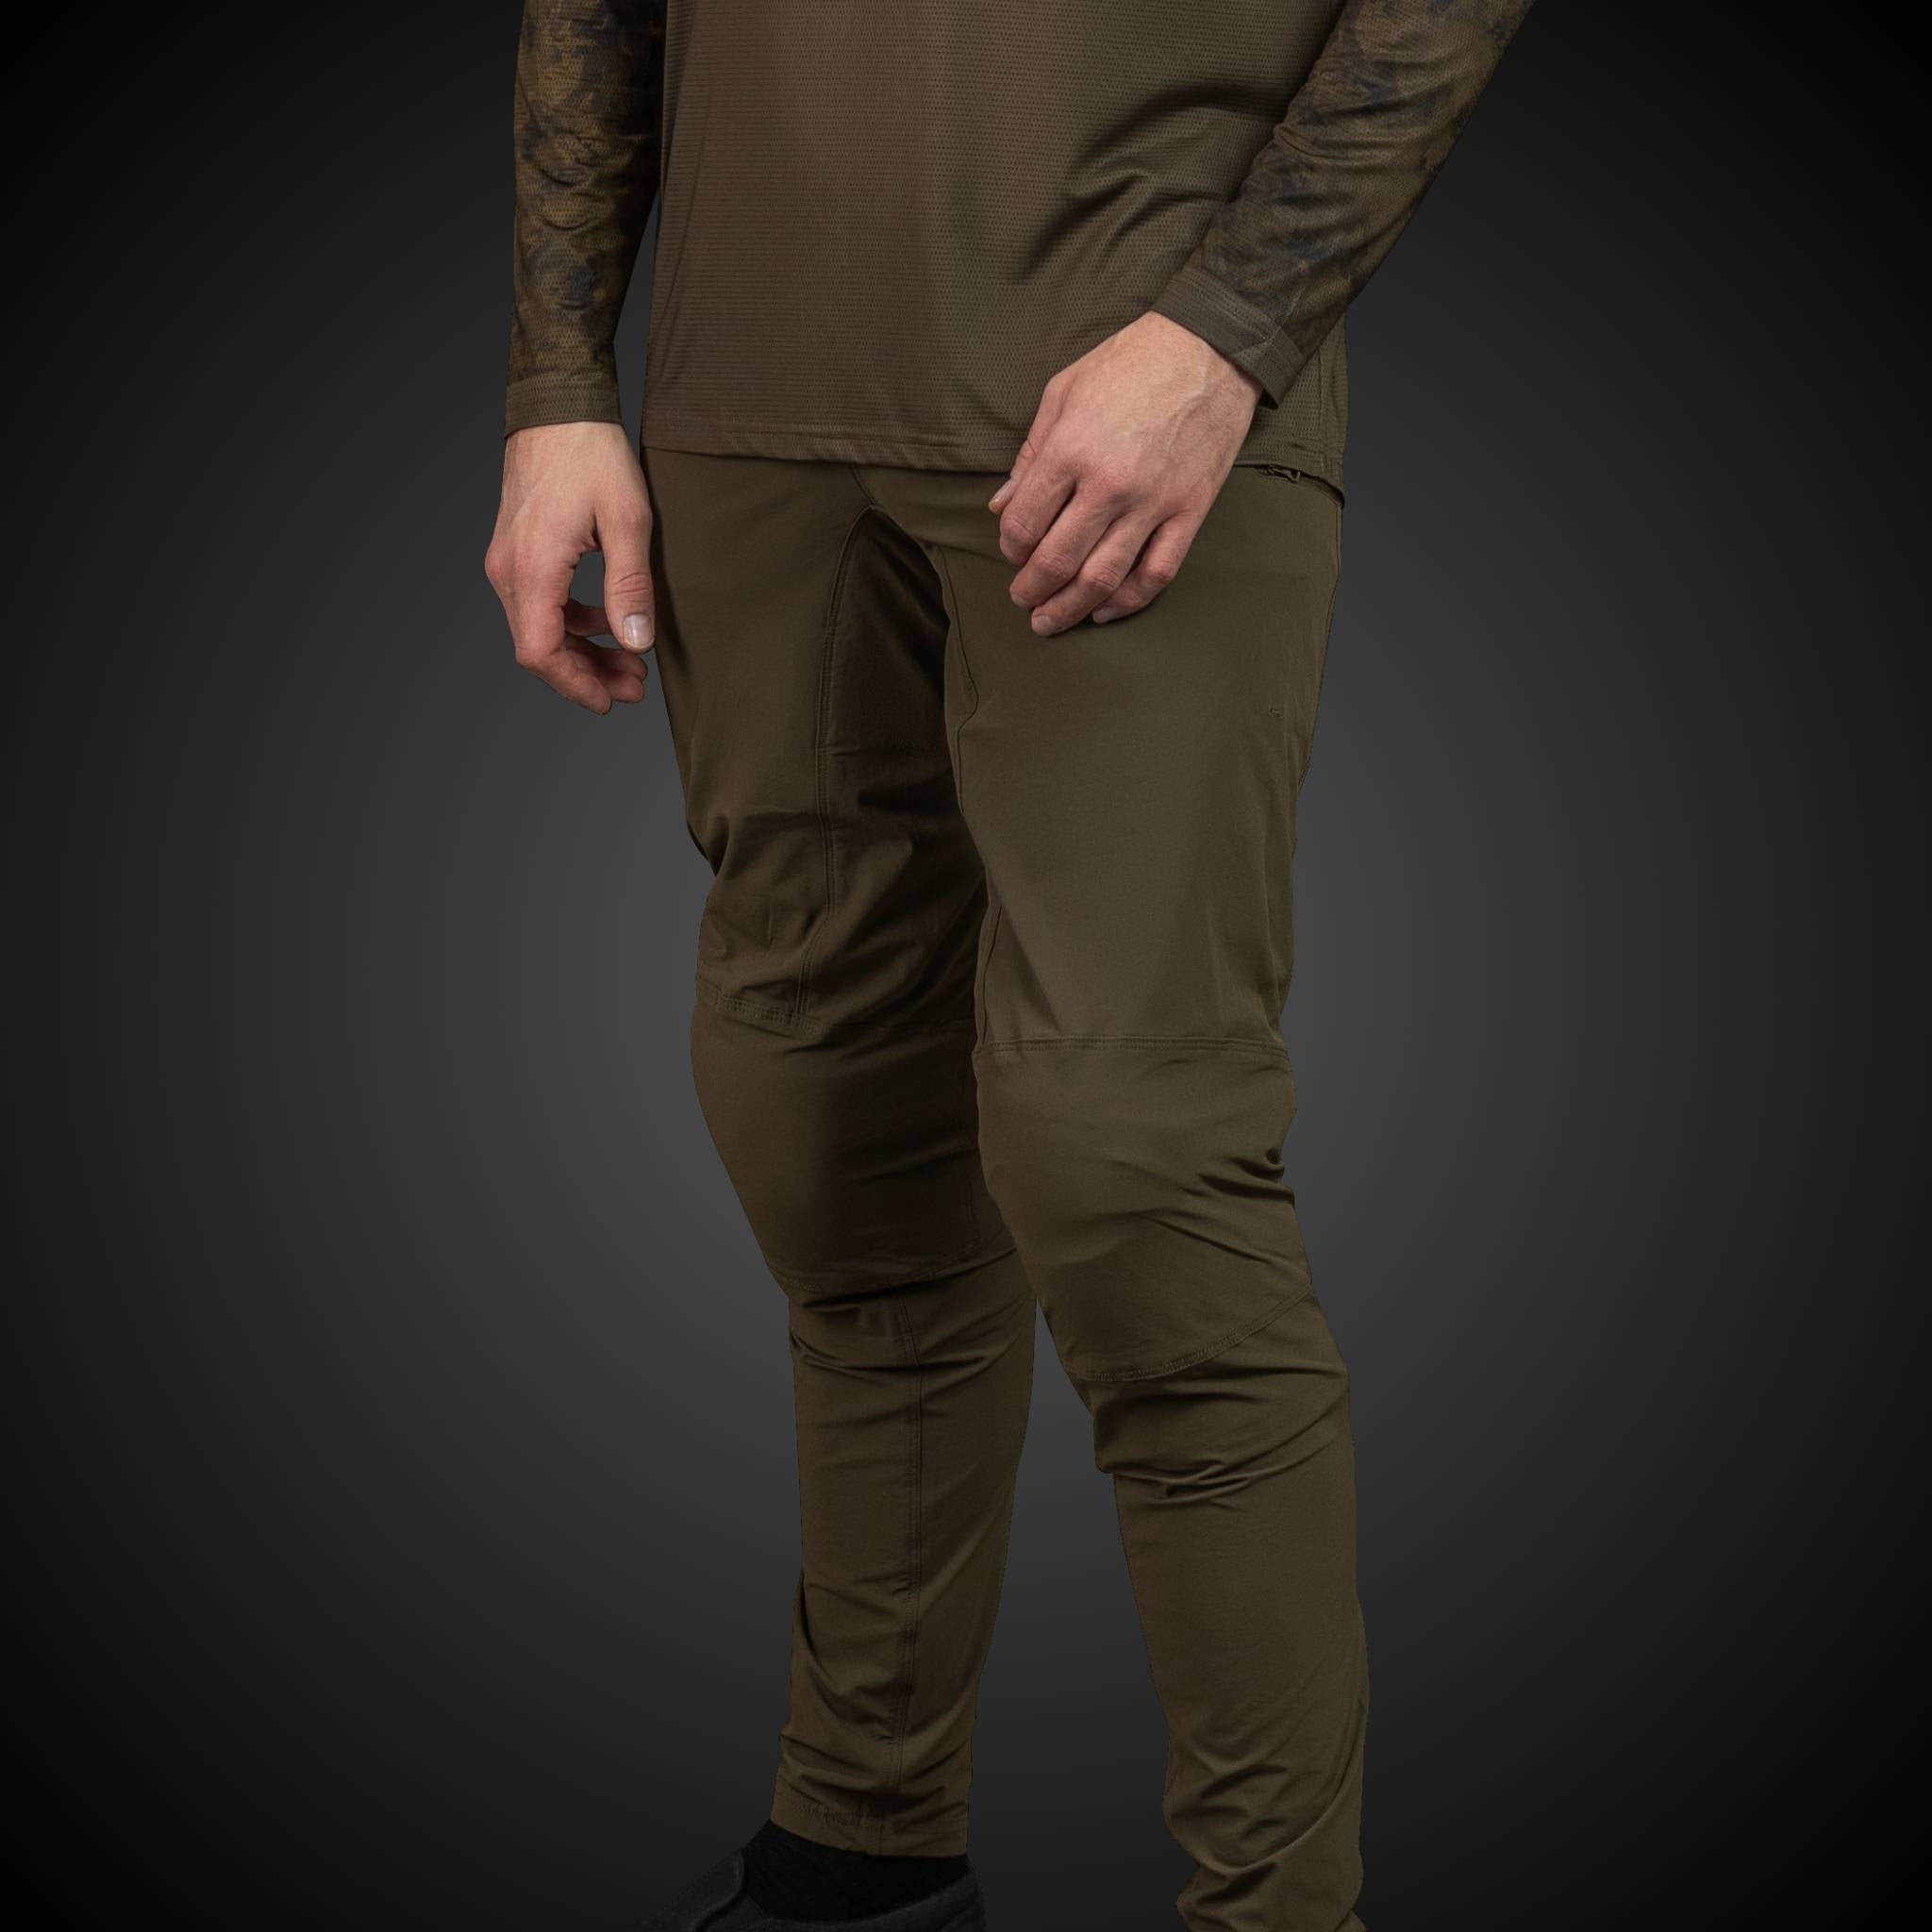 Adventure-ready Gravity 1.02 khaki pants, tailored for mountain bikers seeking comfort and durability in extreme conditions